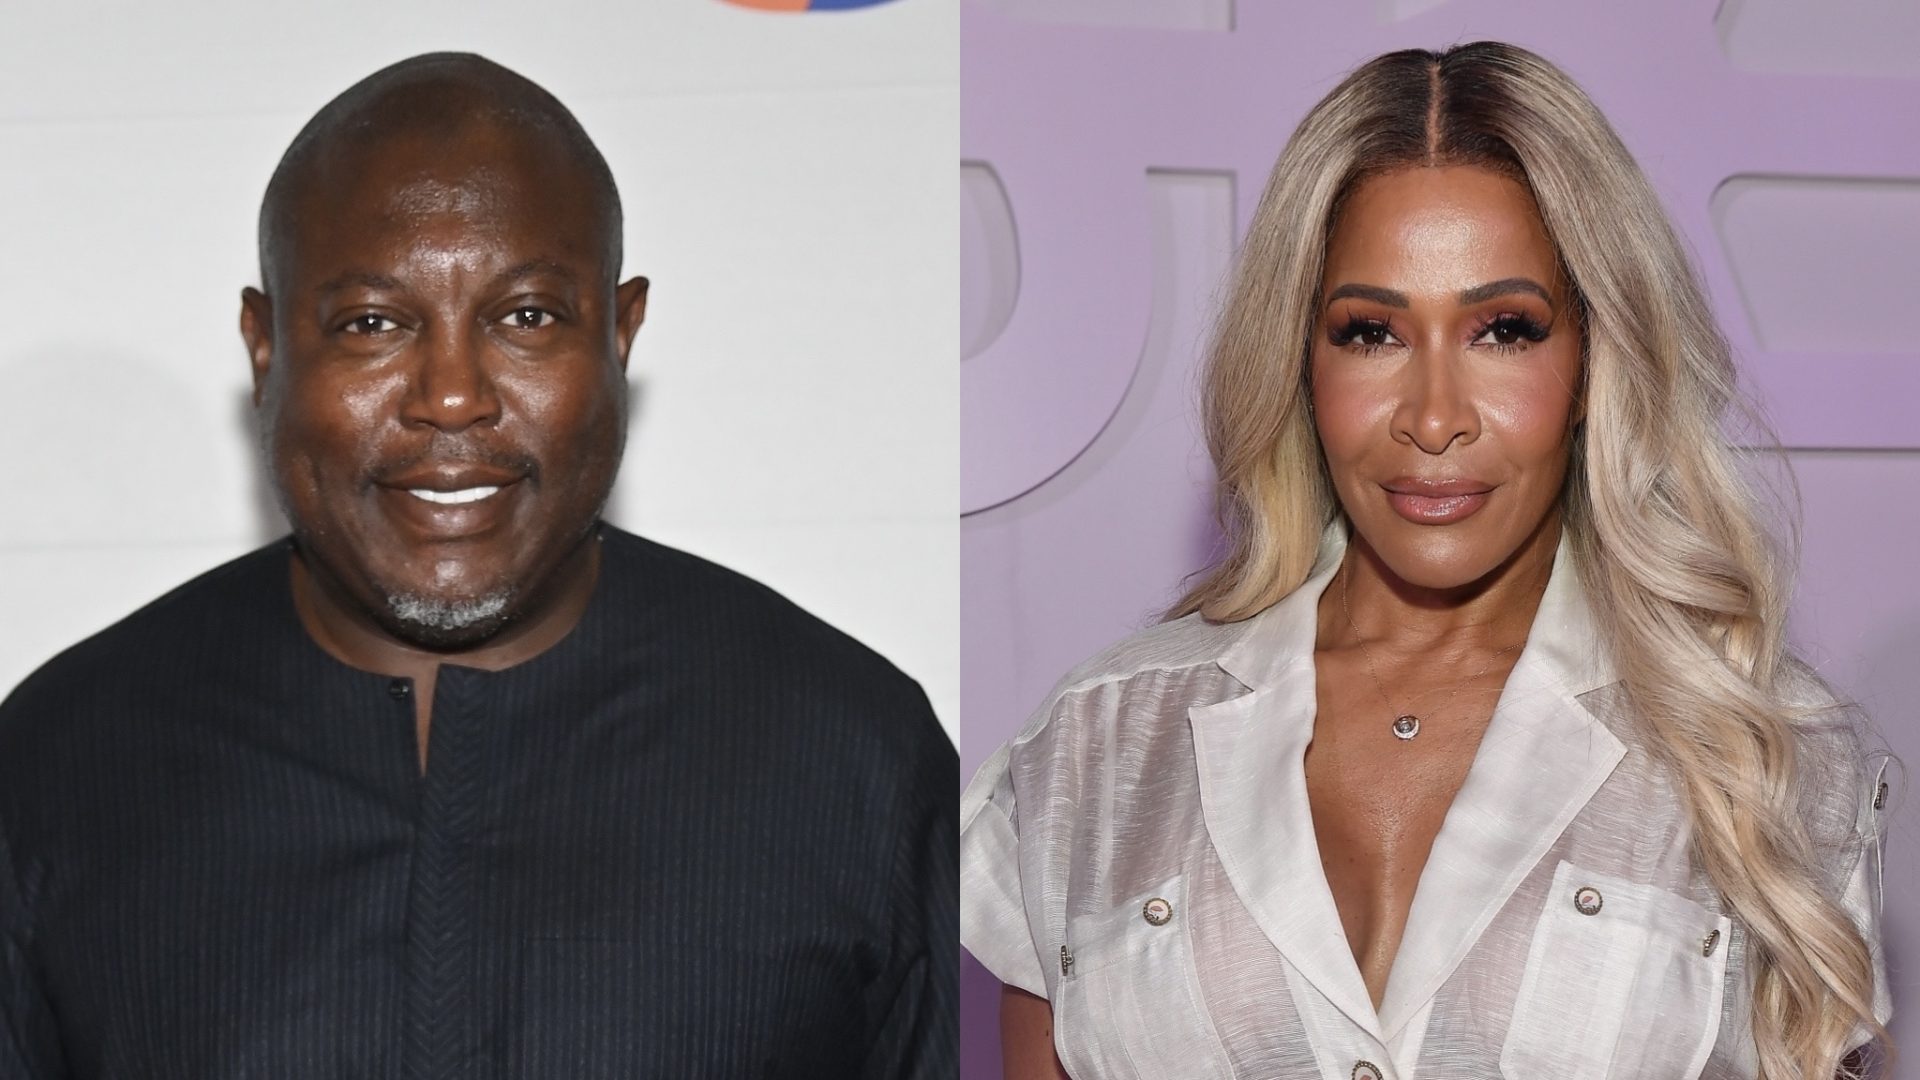 Oop! Simon Guobadia Shares A Message After His Link Up With Shereé Whitfield Sparks Criticism (WATCH)